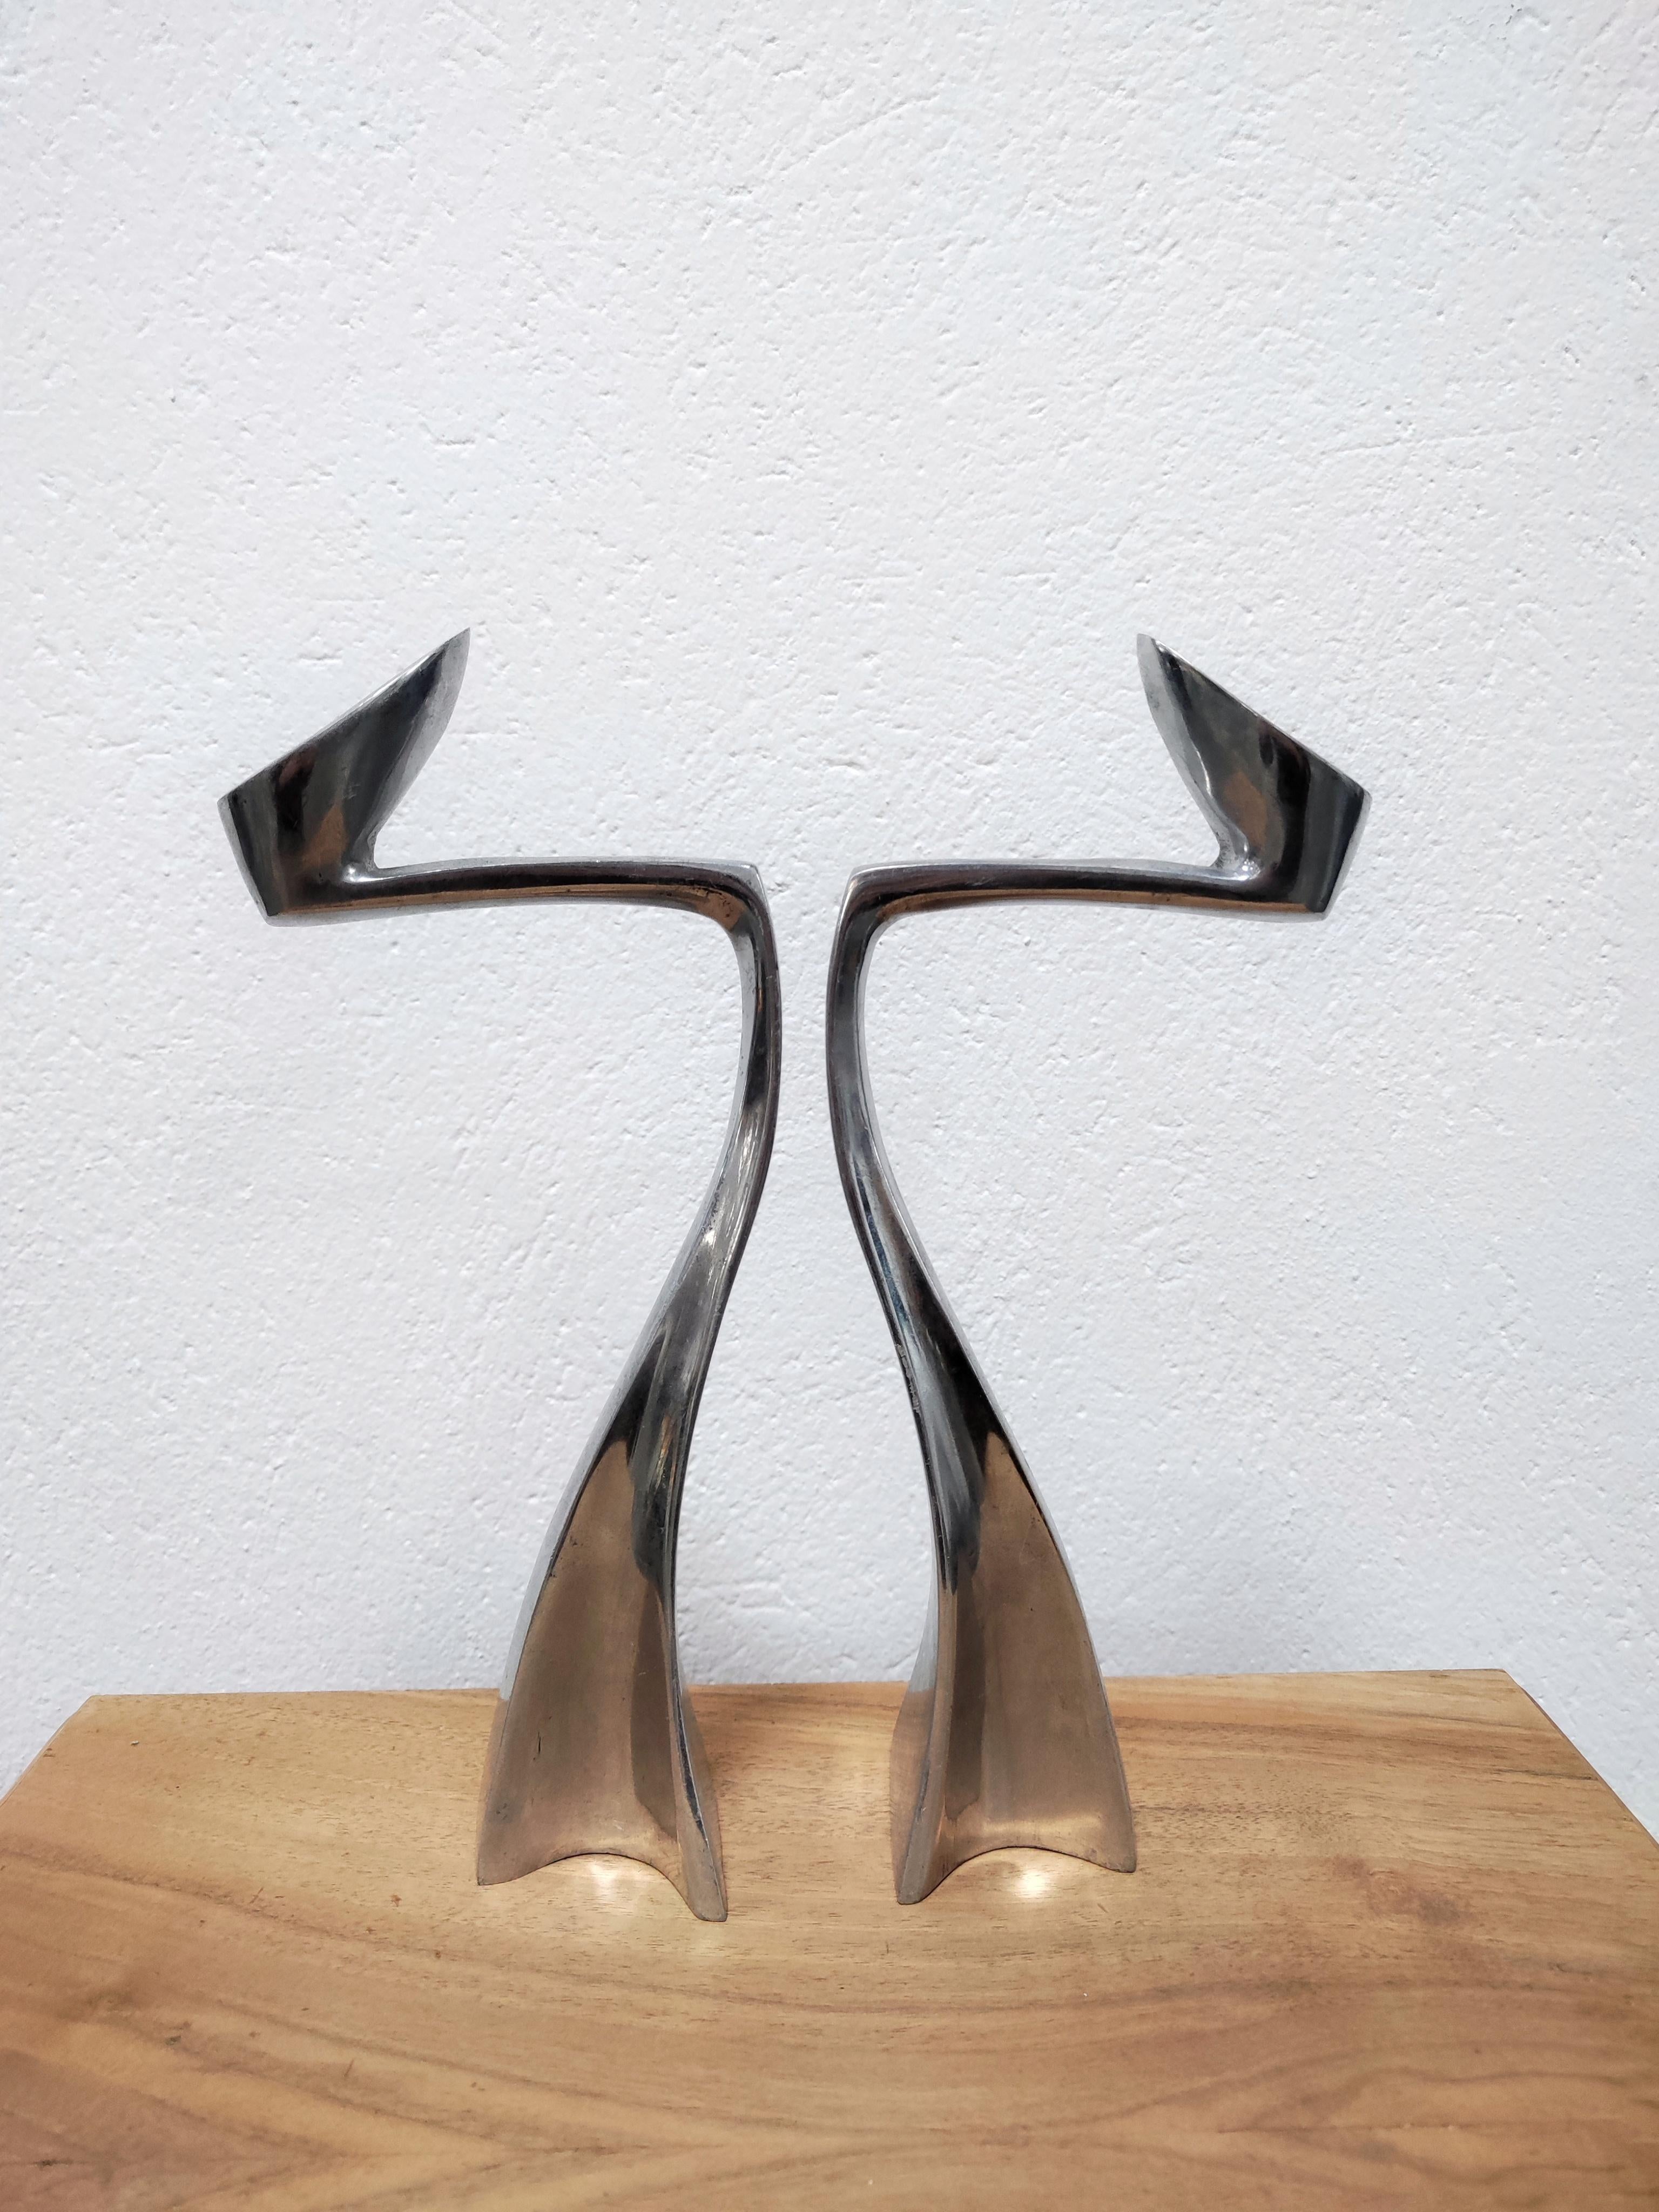 In this listing you will find a pair of Postmodernist candlestick holders designed by Matthew Hilton in 1983 and manufactured by SCP England in 1987. They are called 